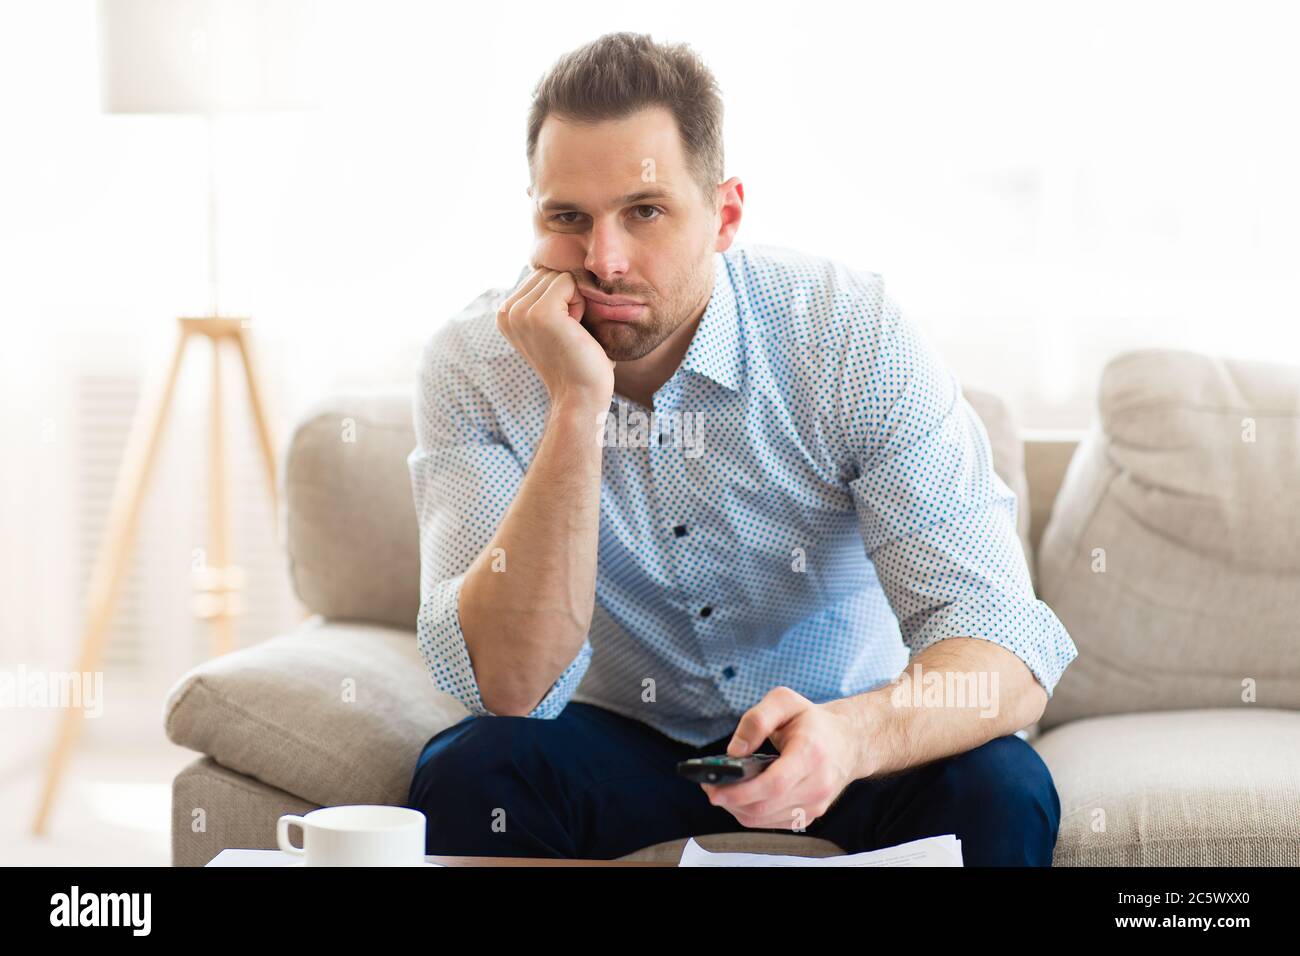 Bored man watching TV at home, holding remote control Stock Photo